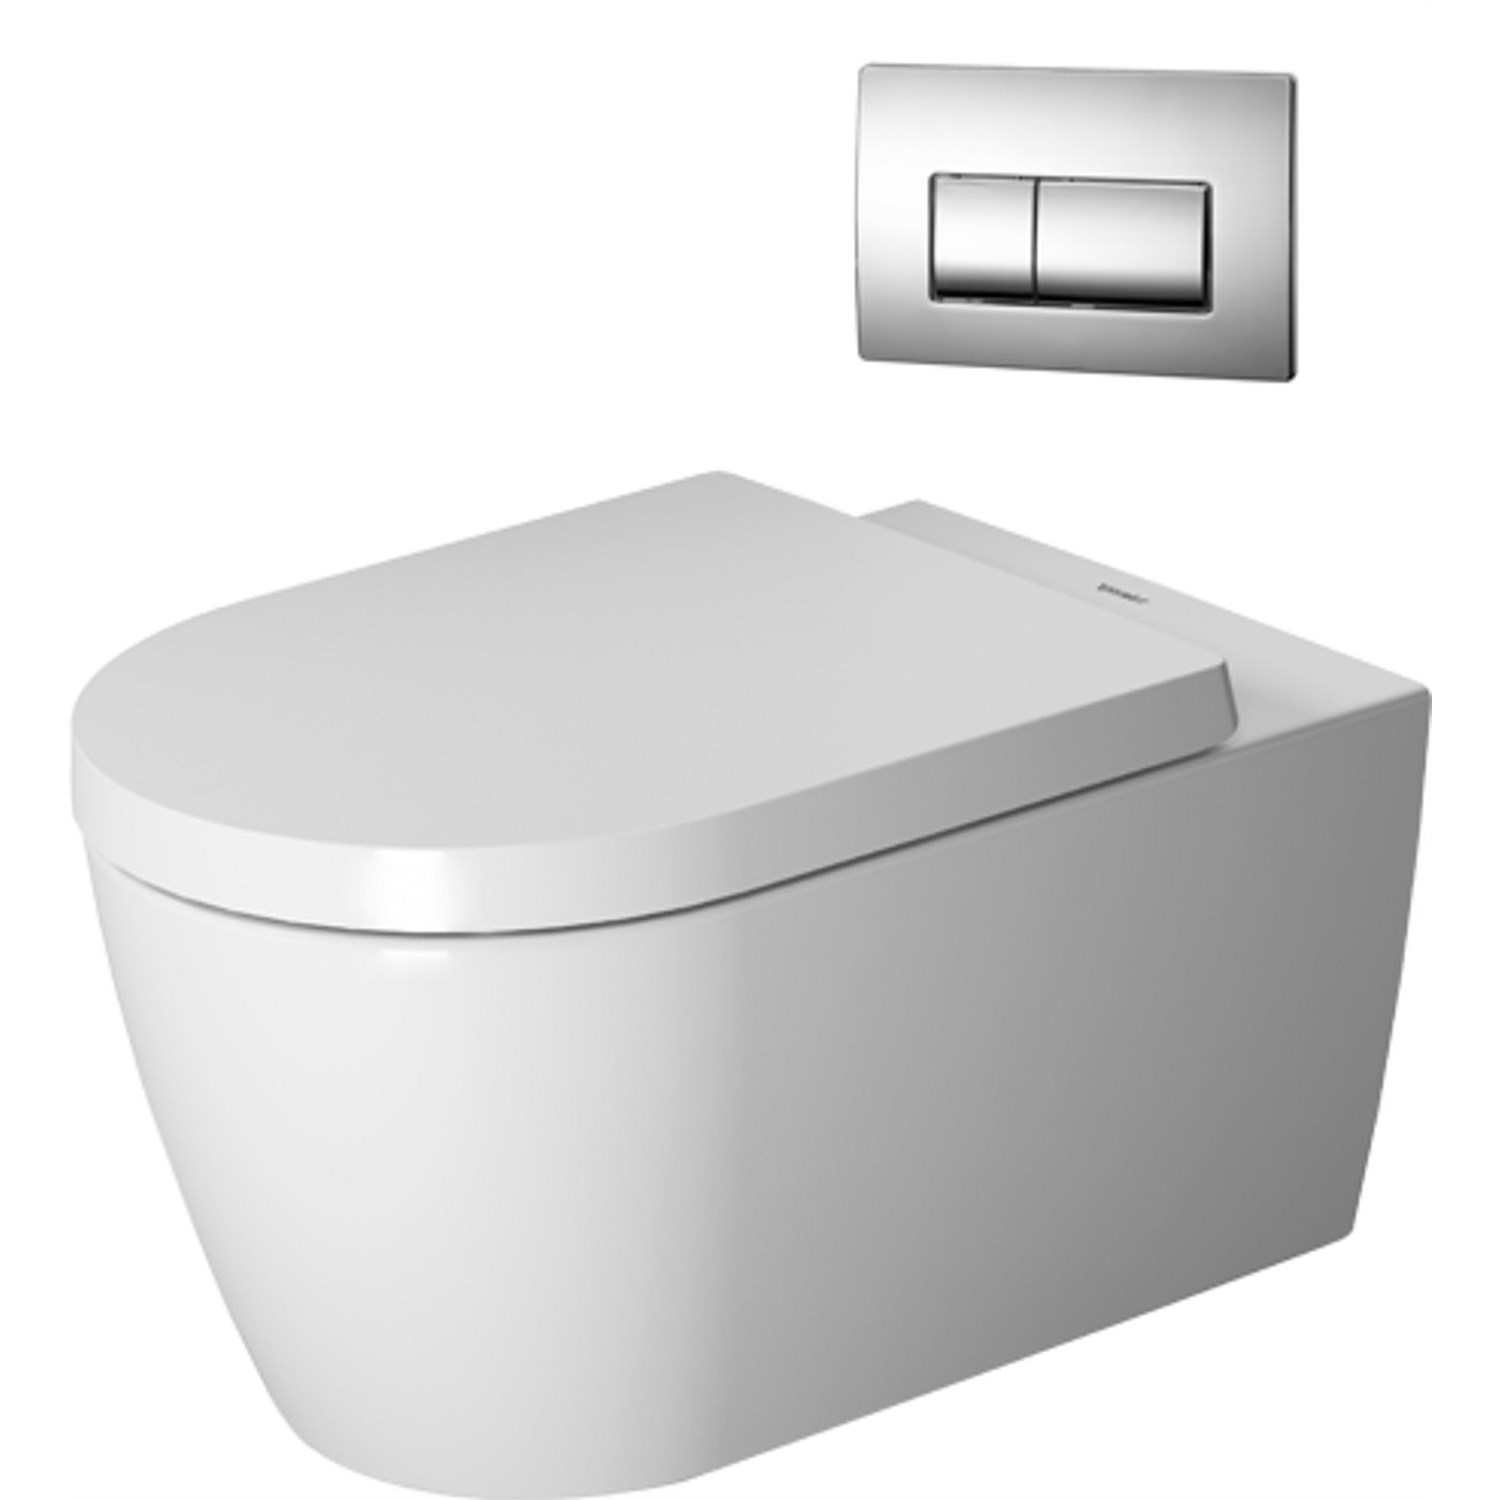 Toilet Suites | Plumbing World - Duravit ME by Starck Rimless Wall-Hung  Toilet Suite